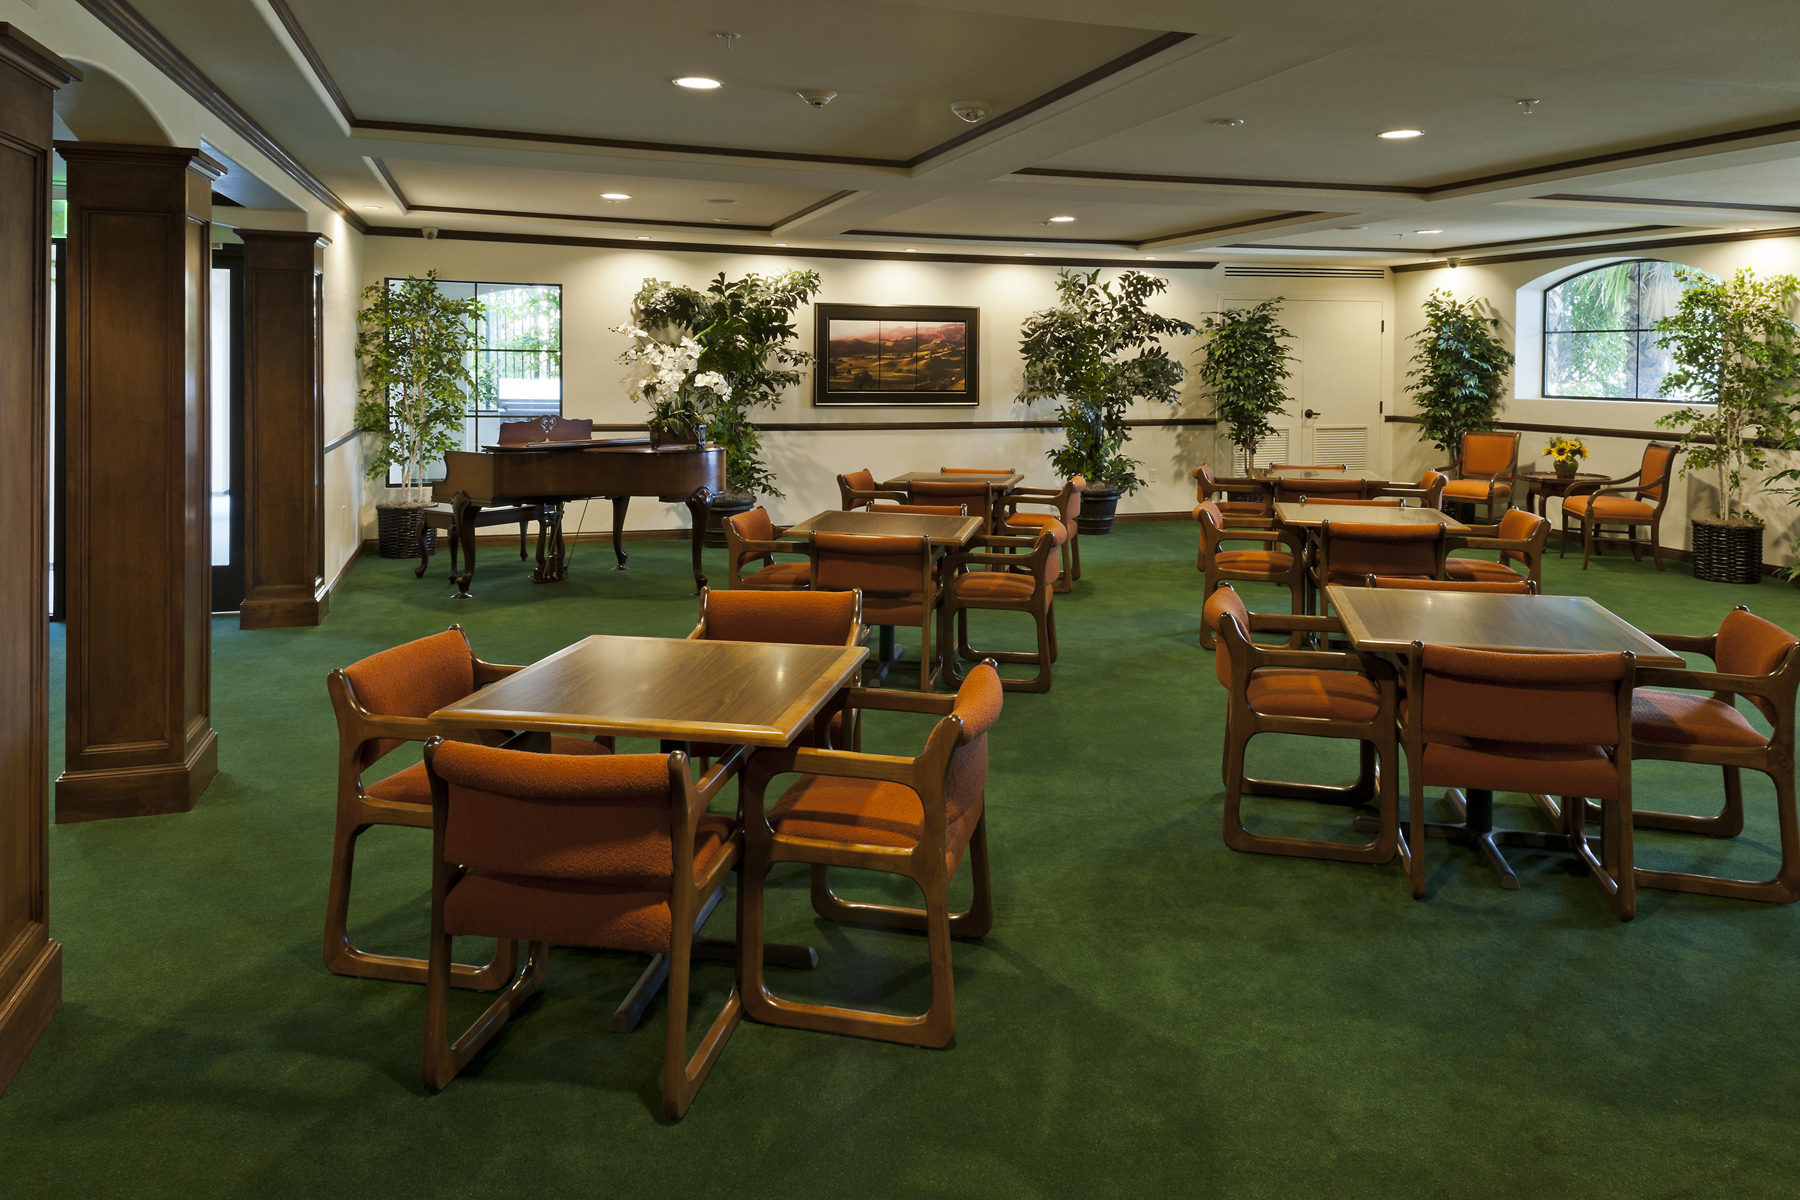 Canby woods housing community room. large wood with green carpet, several brown wood seating and tables, grand piano, plants throughout room, and painting on wall.